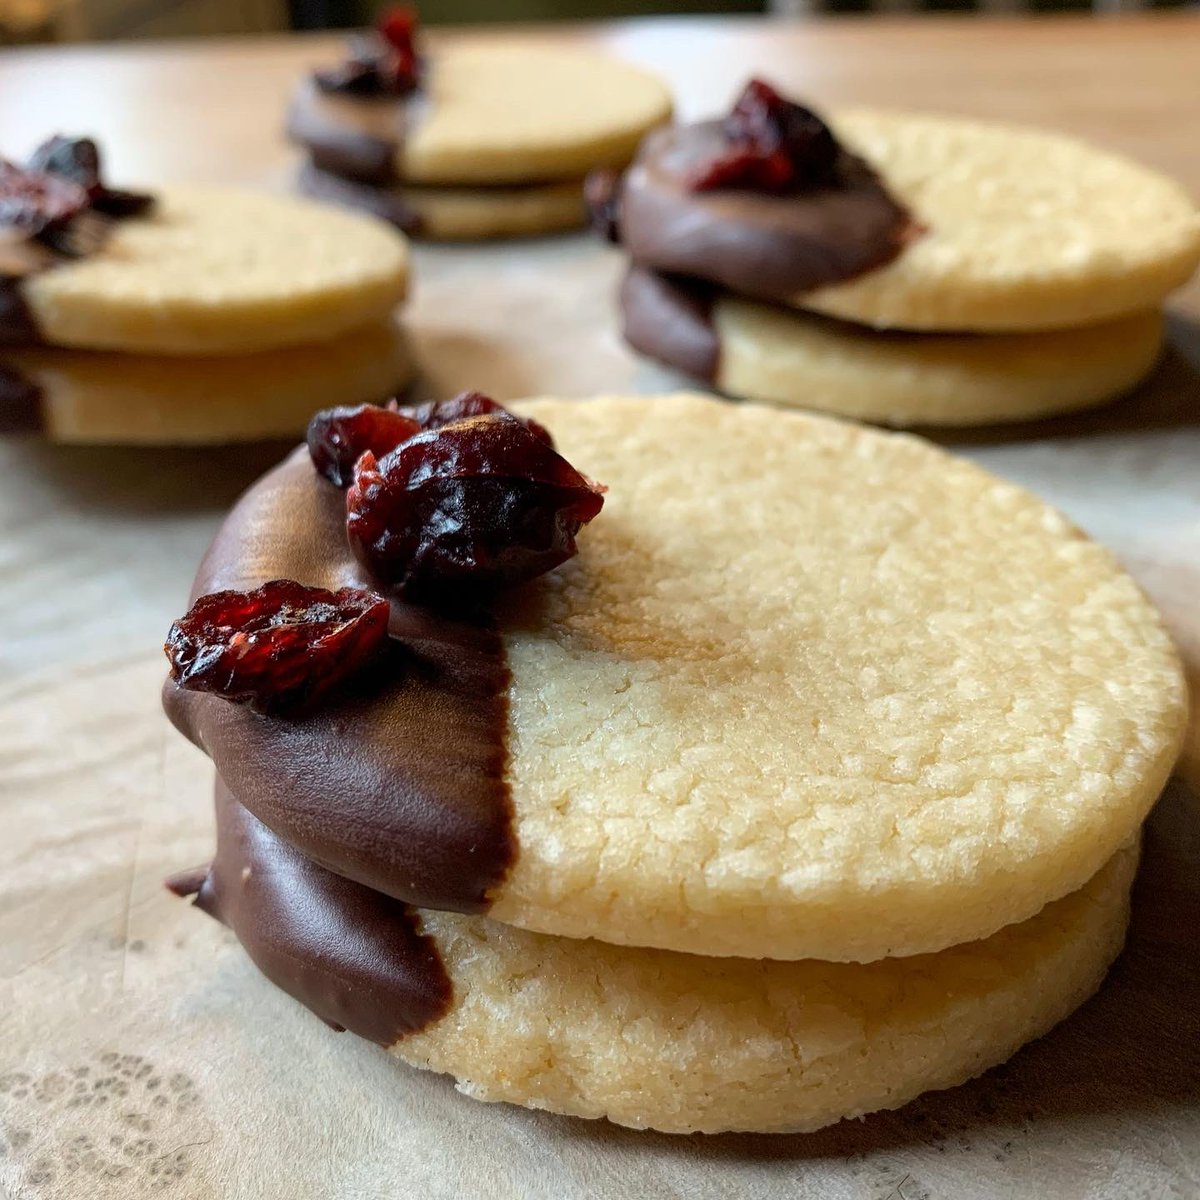 Lemon curd filled or millionaires shortbread.... OR maybe one of each!?!
Biscuit day in the Bakehouse 😃
#biscuits #shortbread #sable #millionaireshortbread #lemoncurd #bakers #bakery #madefromscratch #baking #biscuit #biscuitsofinstagram #tonbridge #kent